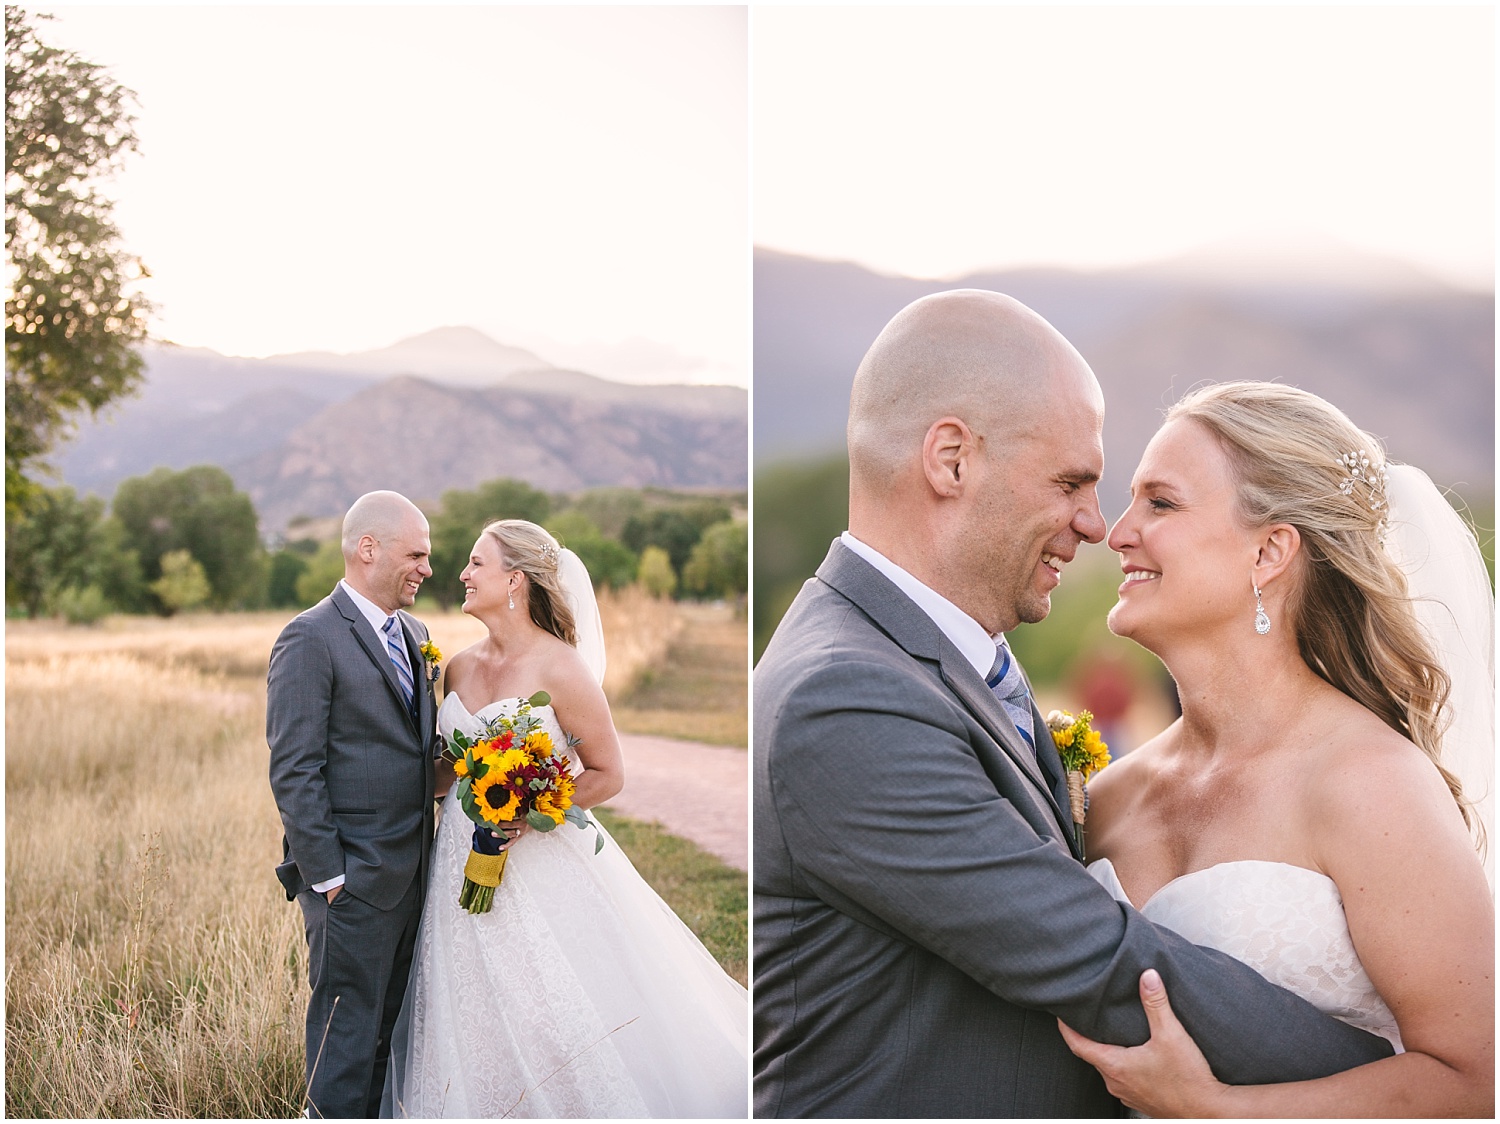 Bride and groom portraits at sunset in front of Pikes Peak in Colorado Springs